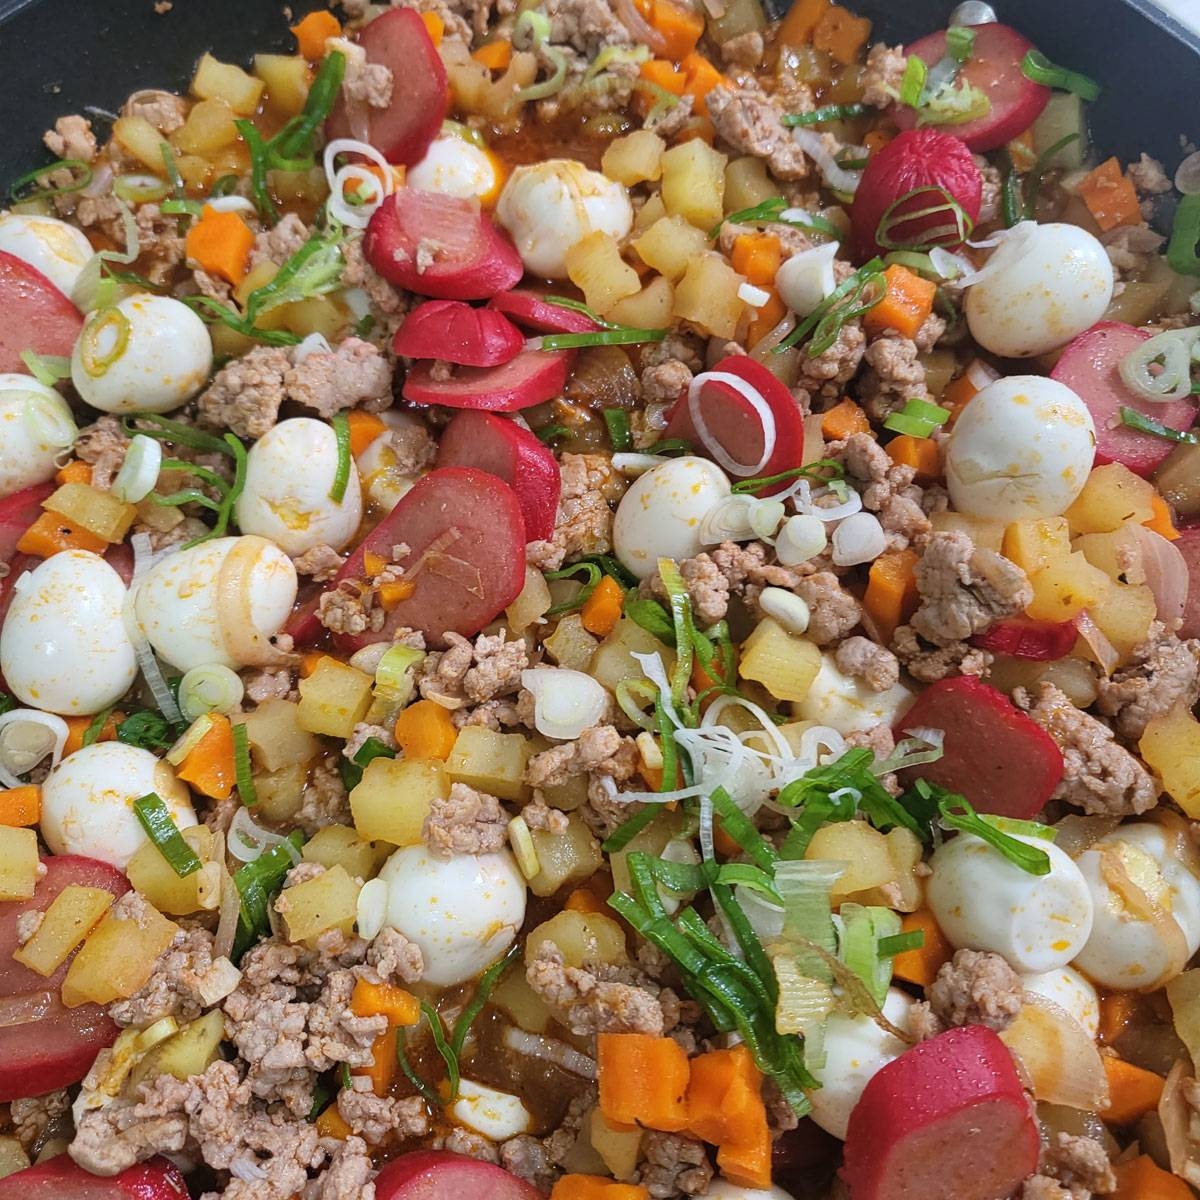 Try this easy picadillo recipe for the family’s next weeknight meal.